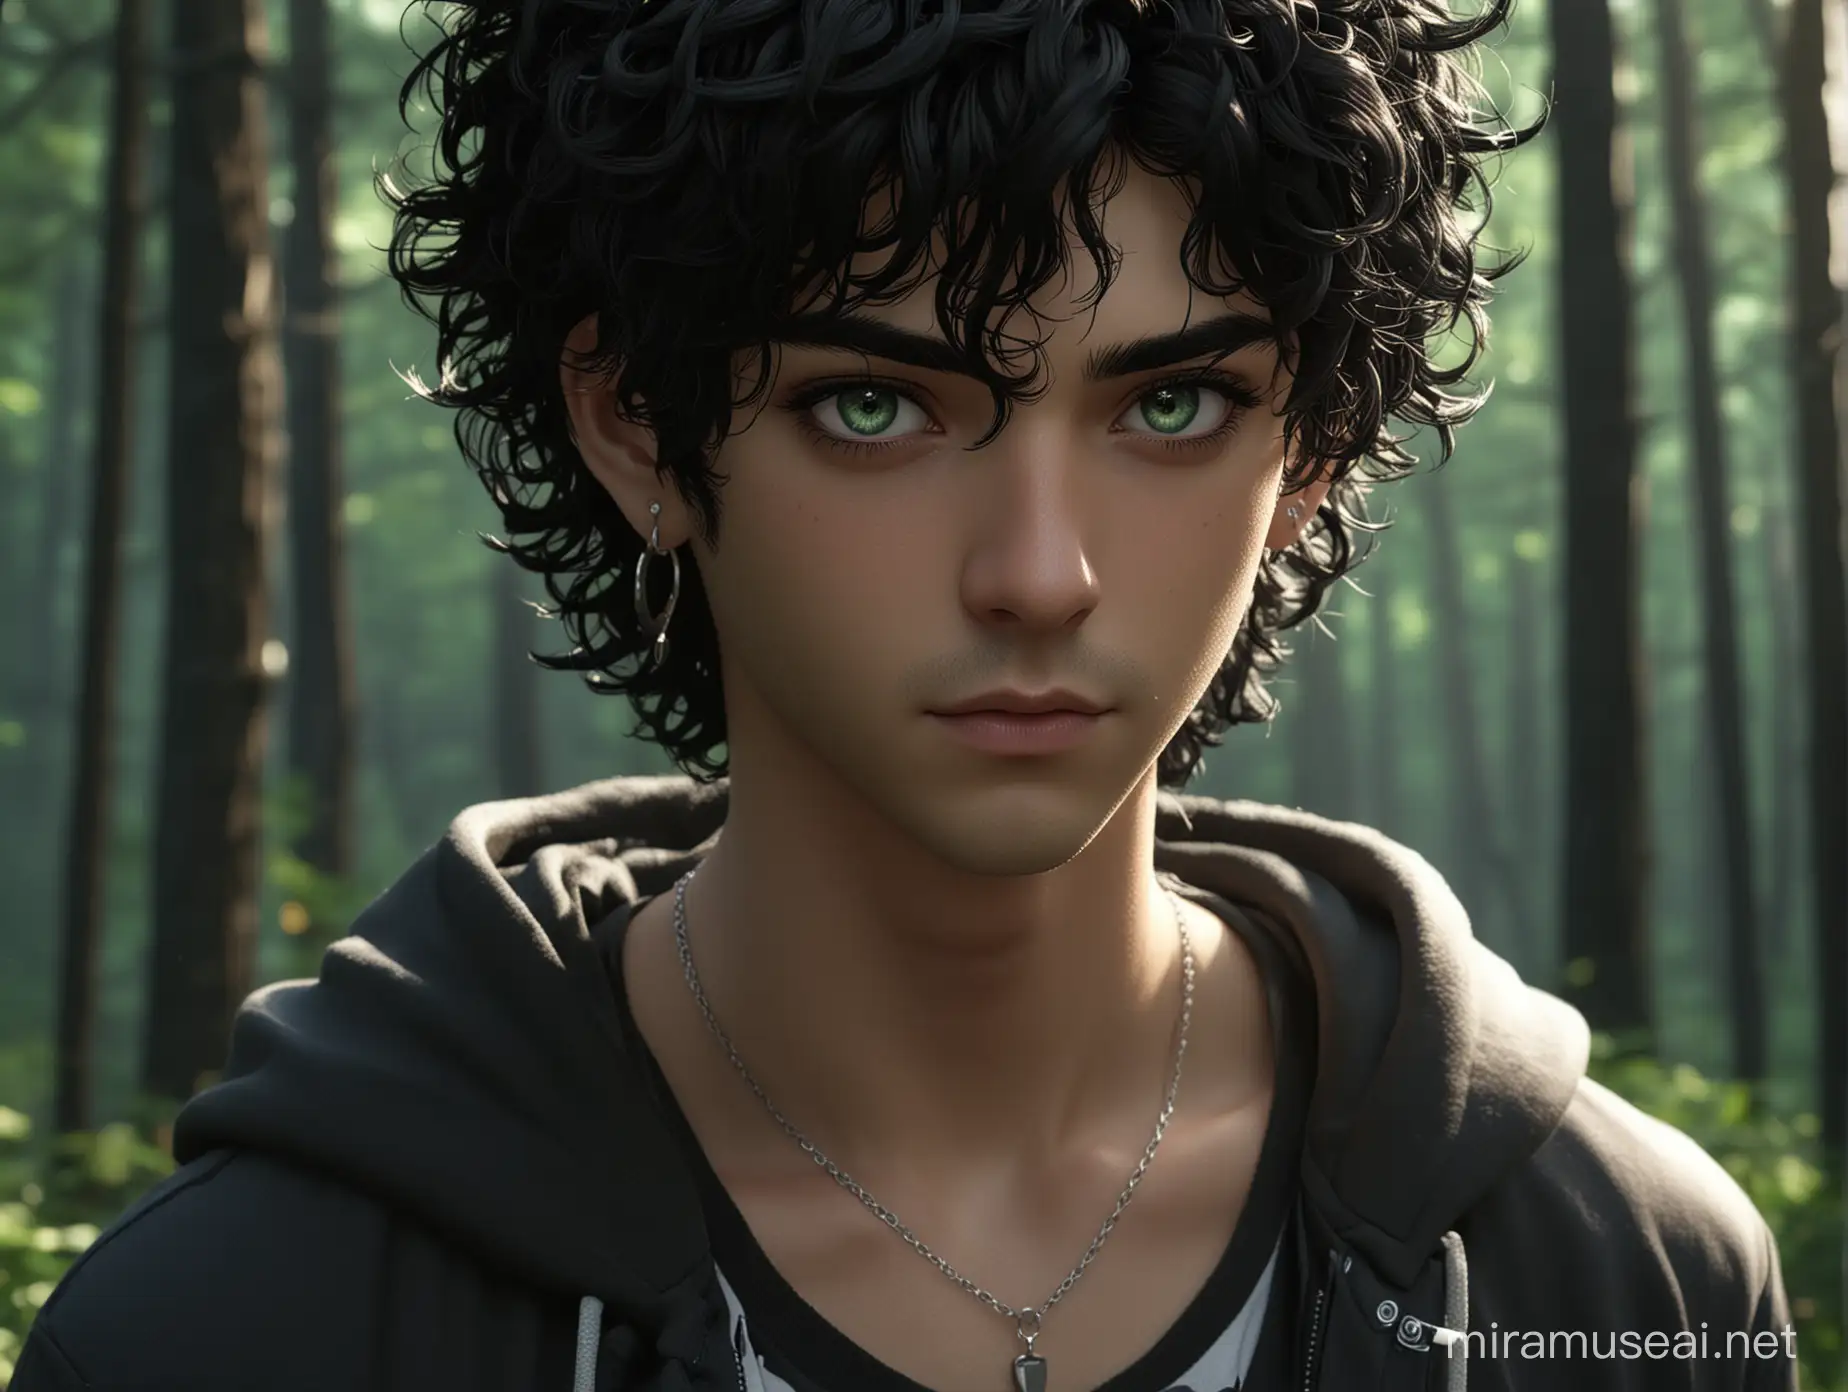 3d, anime, male, big black curly hair, long earrings, black eyebrows, green eyes, emo, forest low light